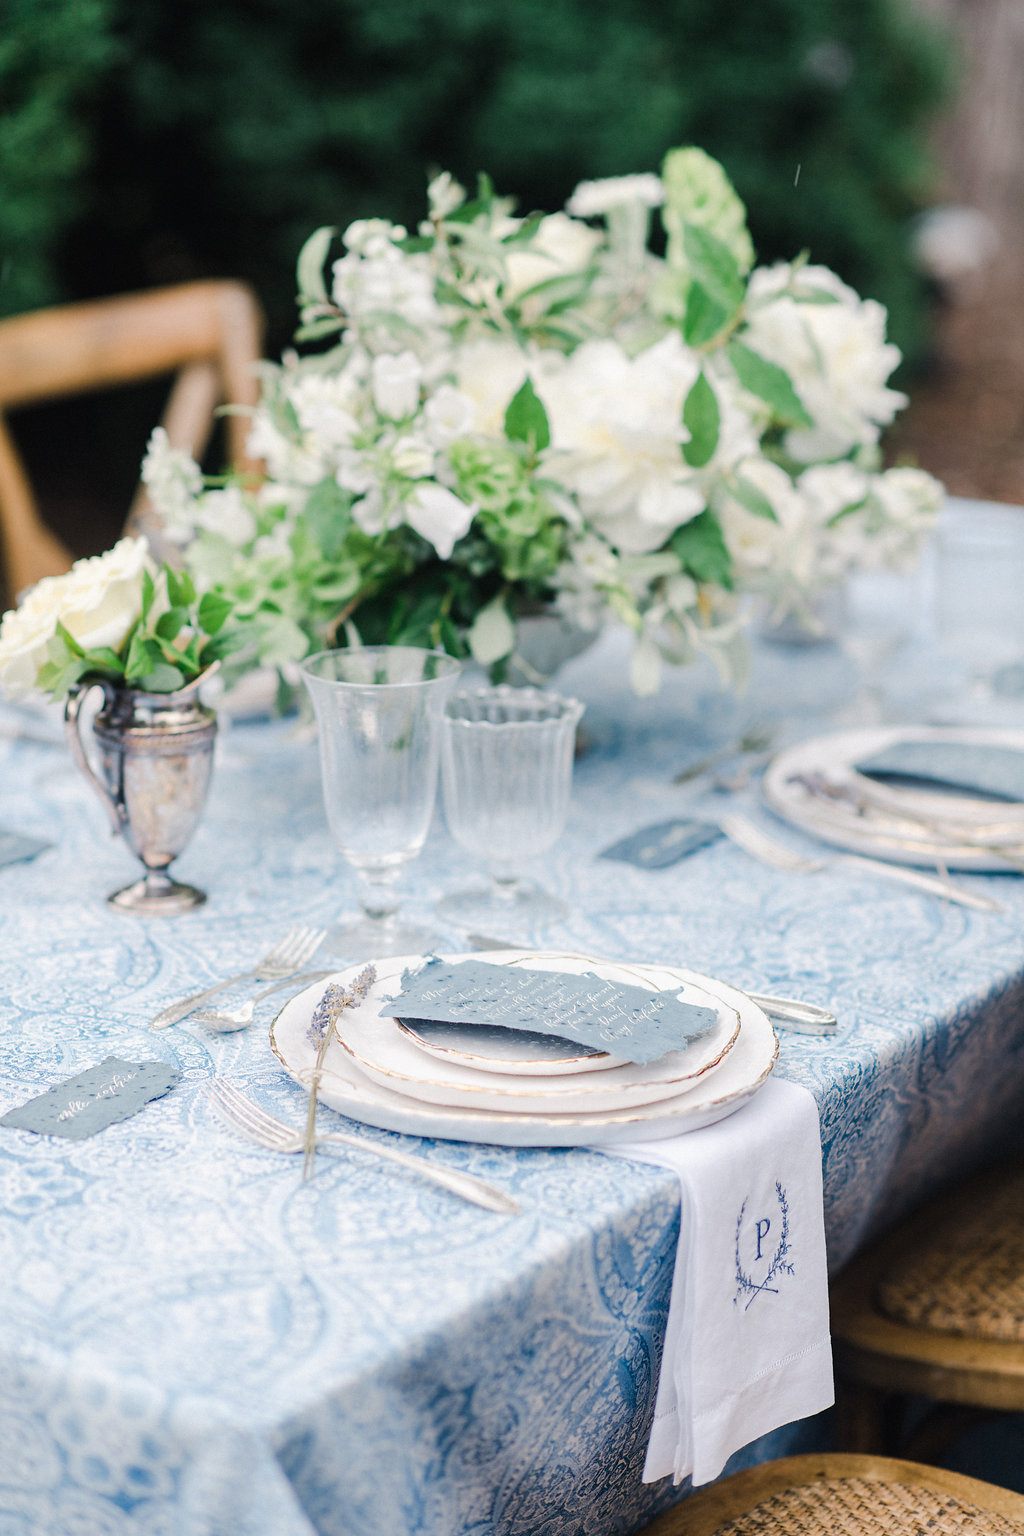 Blue and white table cloth with dinner plates, glasses and white floral centerpiece outside. 